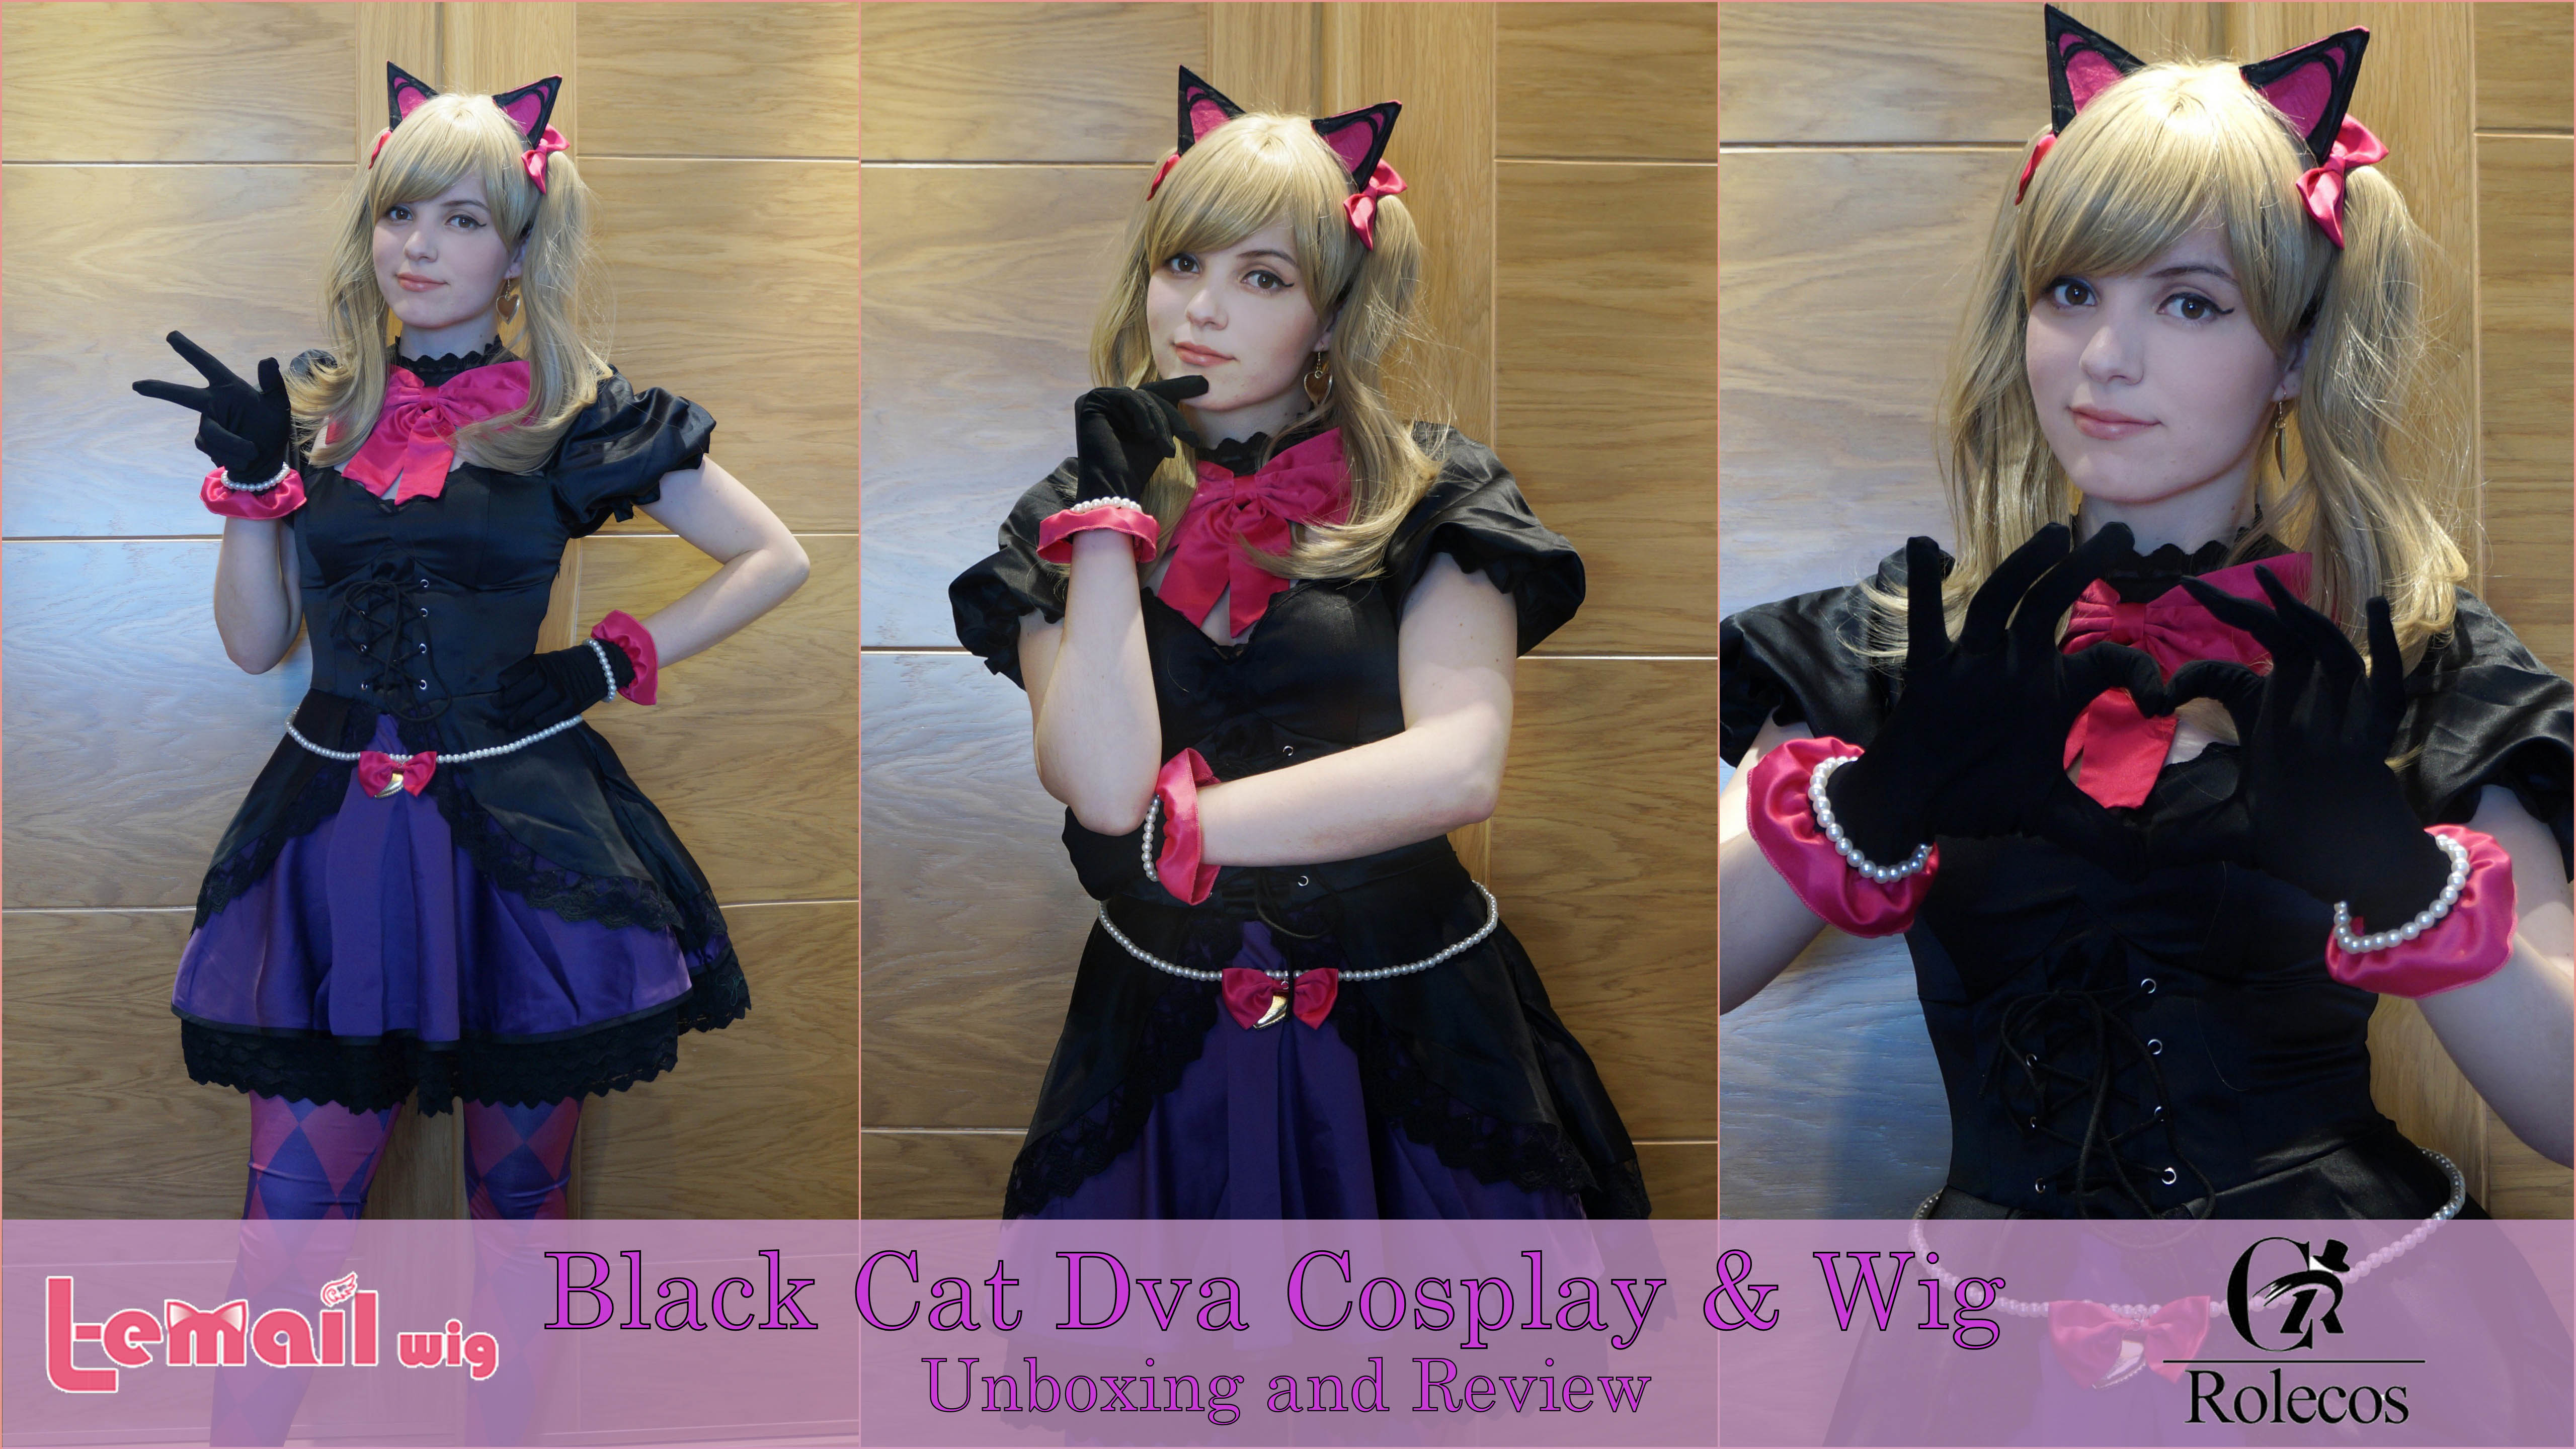 Black Cat Dva Wig & Cosplay review from L-email and Rolecosplay.